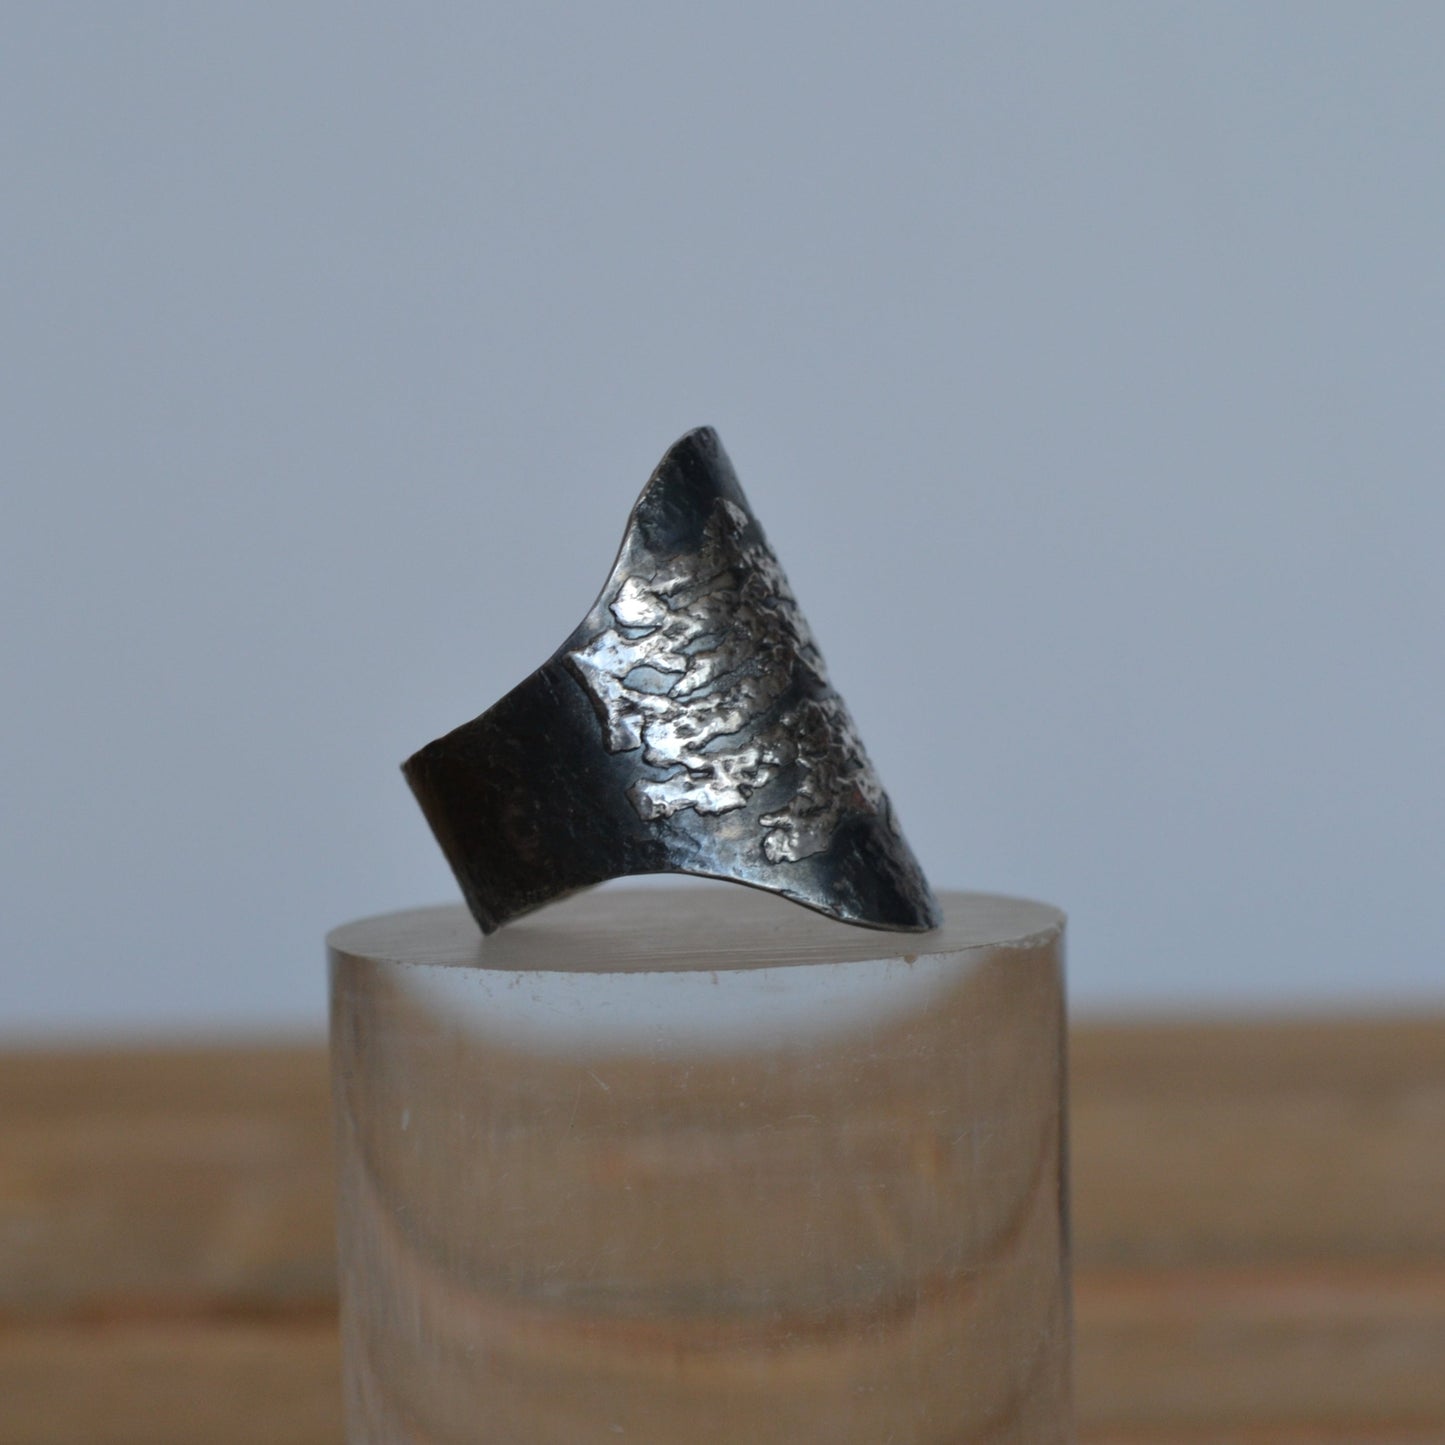 Oxidized silver ring